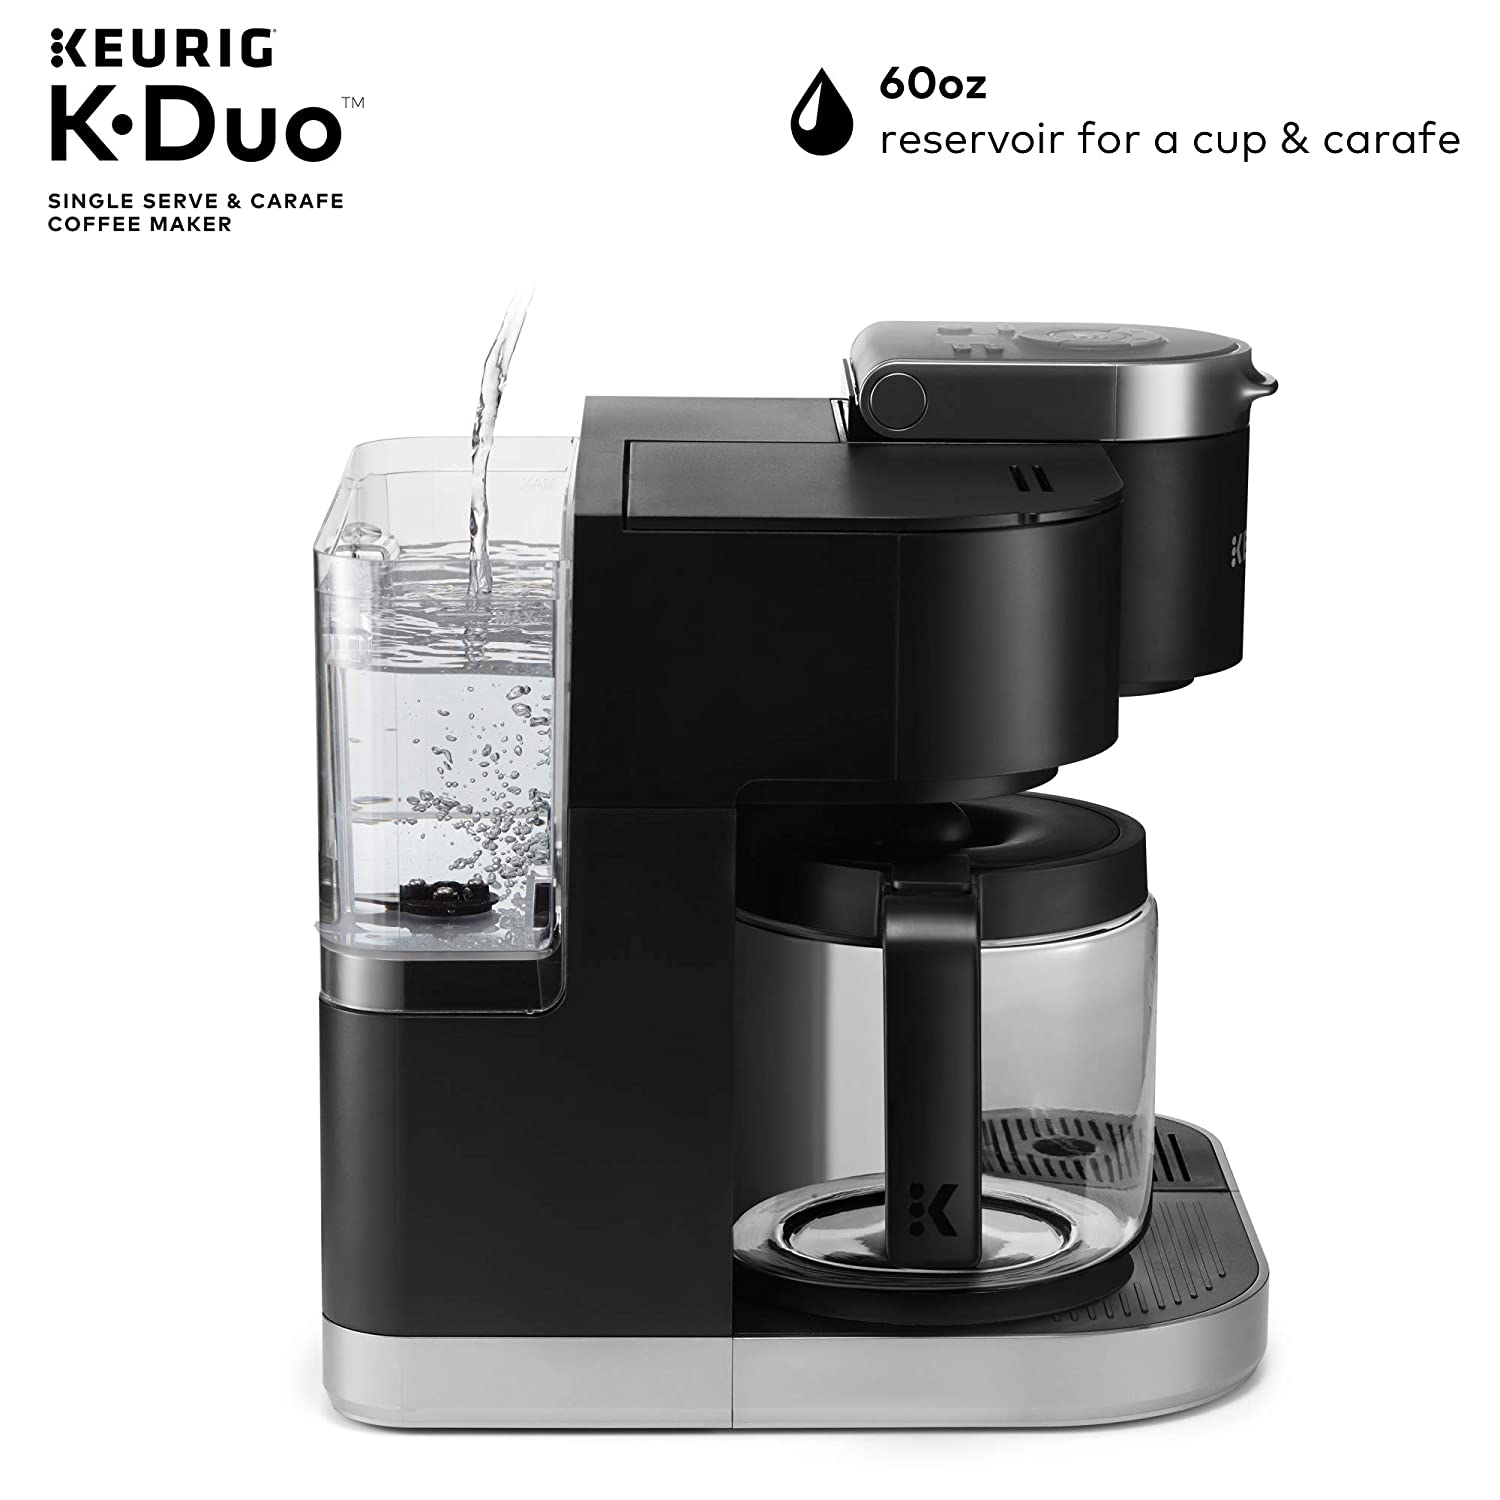 Keurig K-Duo Coffee Maker, Single Serve and 12-Cup Carafe Drip Coffee Brewer, Compatible with K-Cup Pods and Ground Coffee (Black) $84.99 + Free Shipping